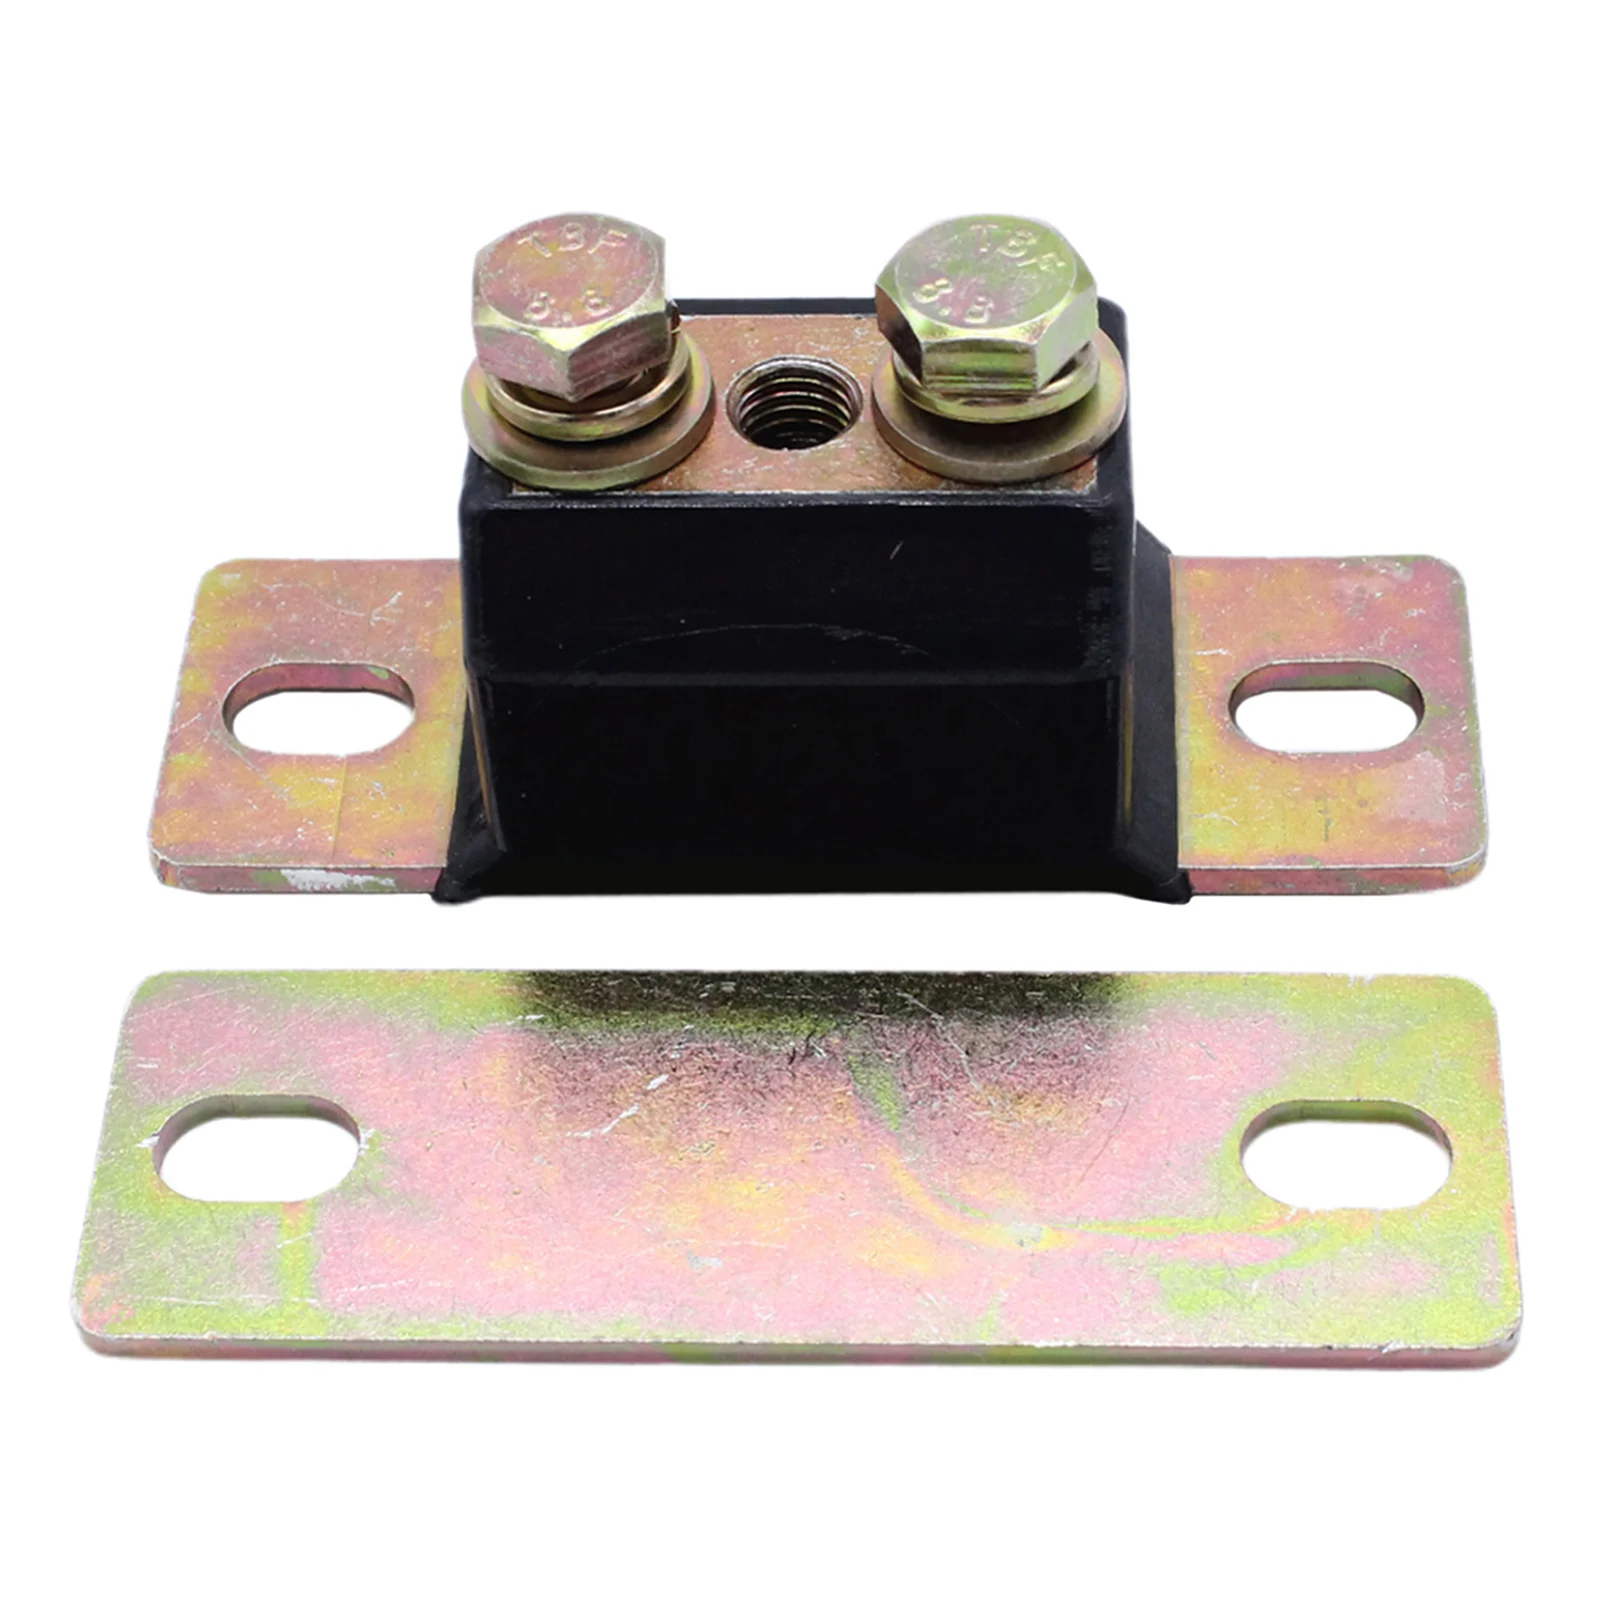 Polyurethane Transmission Mount for  GM TH350 TH400 700 R4, ,Easy to Install